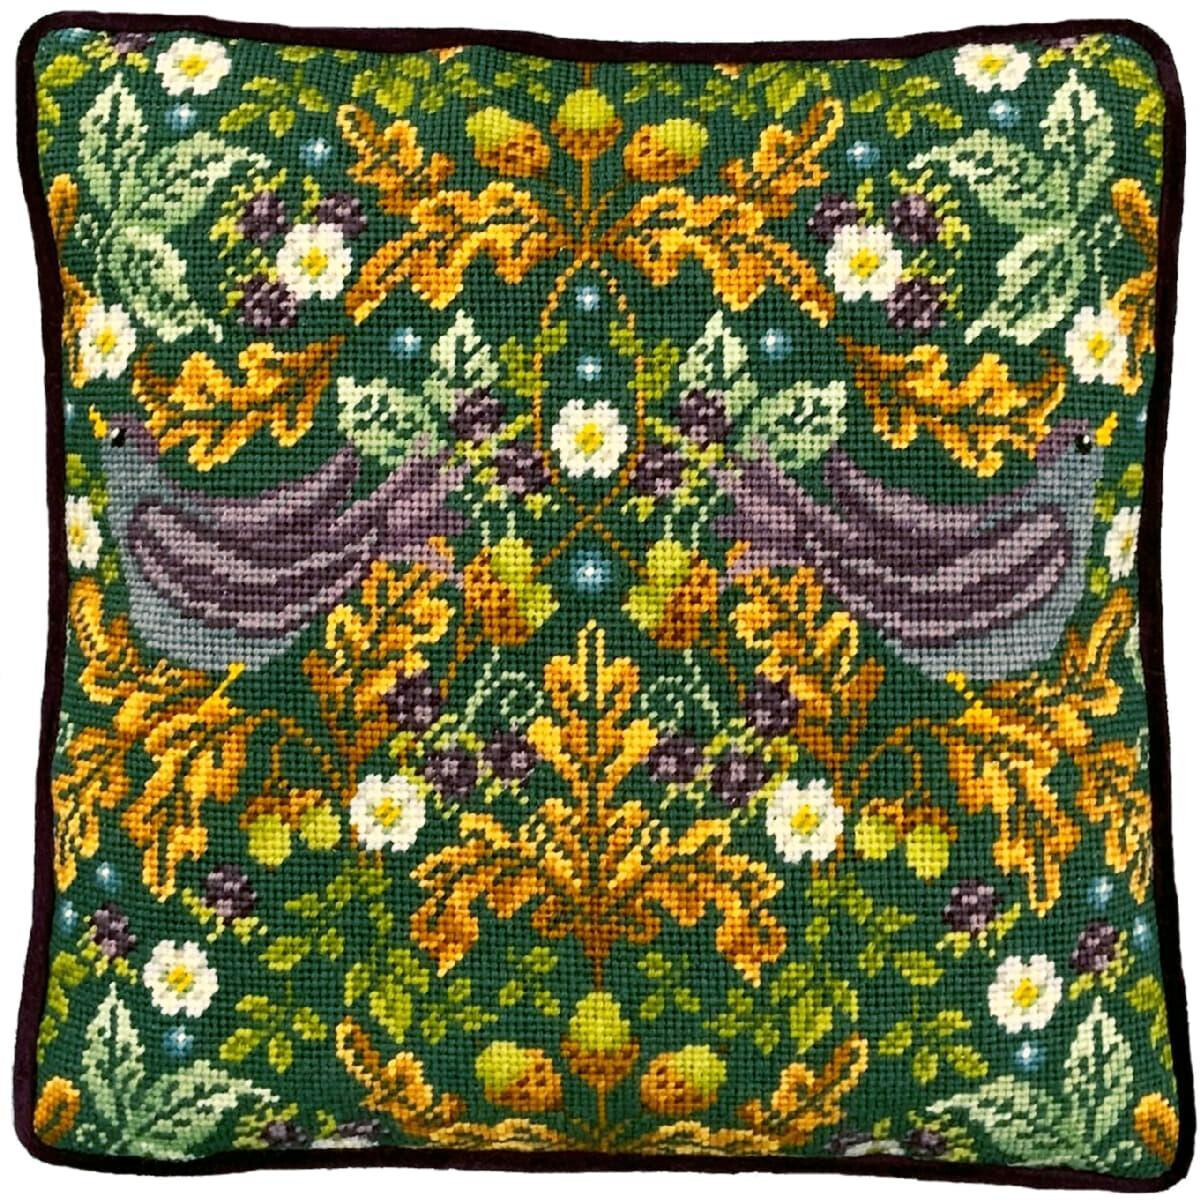 Square needlepoint cushion with a detailed floral pattern...